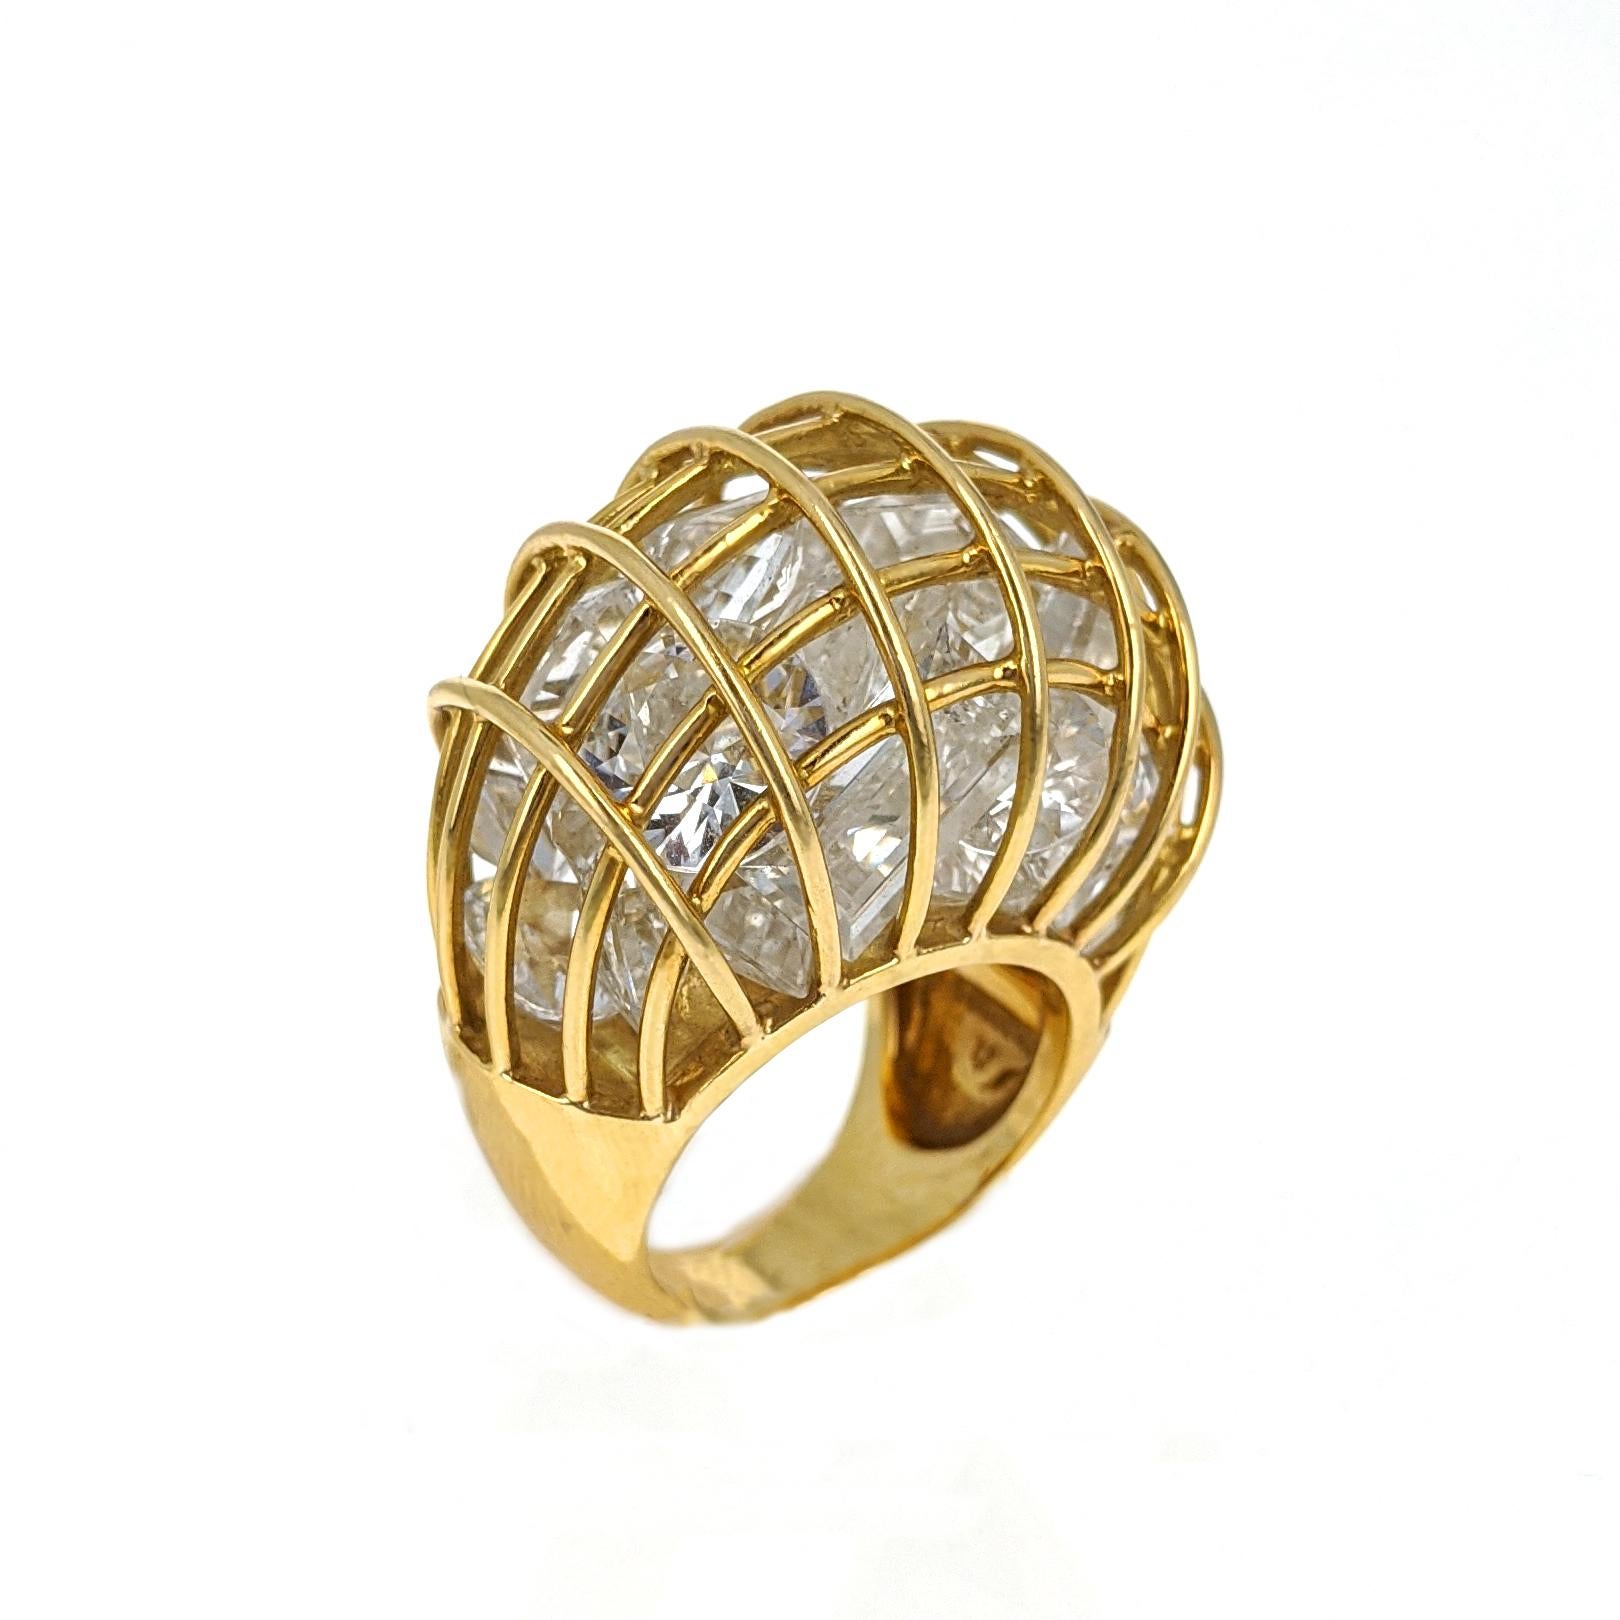 This statement ring by Verdura features twenty-five mixed-cut faceted rock crystal quartz stones confined in an 18 karat yellow gold cage with dome shape. It sits .63 inches atop the finger and is size 5.75. Signed Verdura, with maker's mark. This